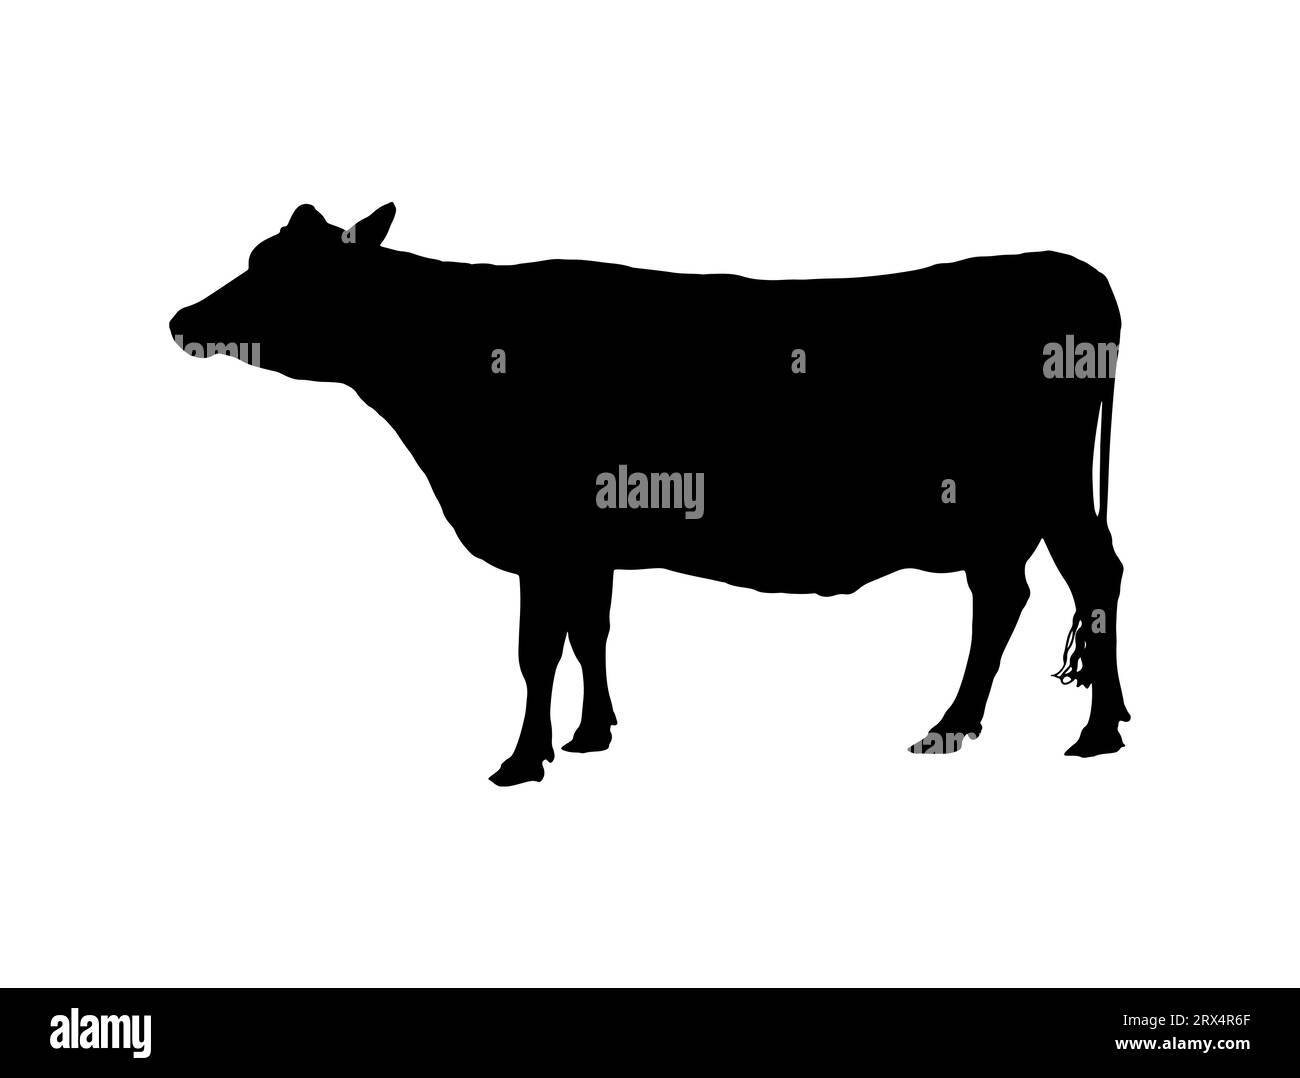 Cow silhouette vector art white background Stock Vector